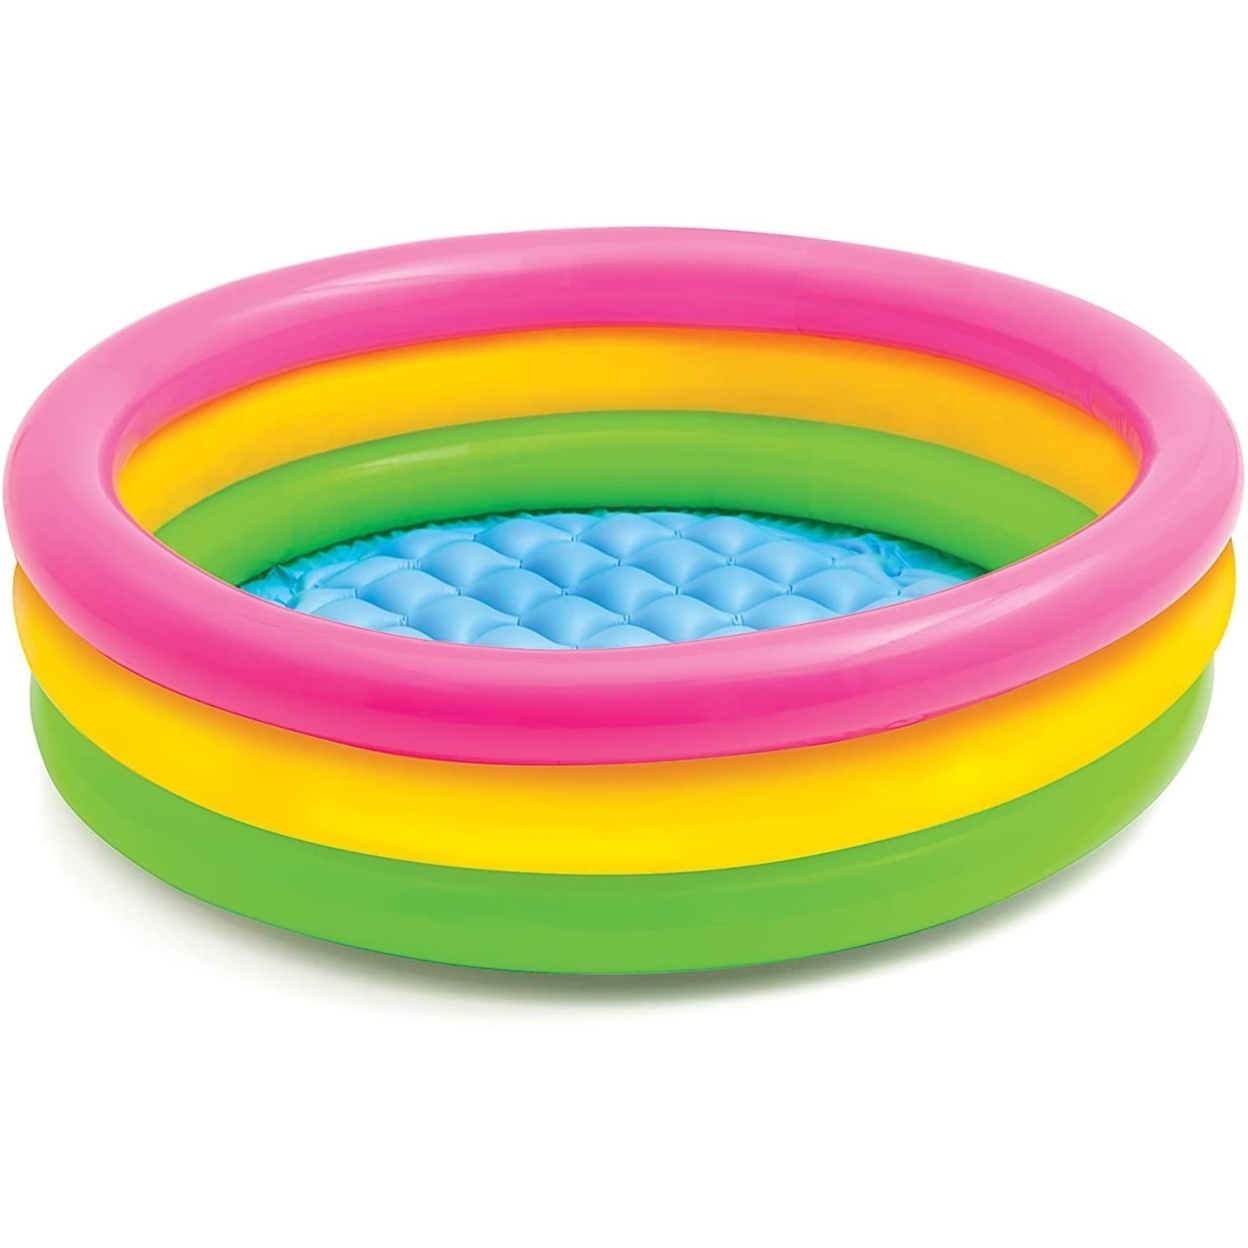 Intex Sunset Glow Baby Pool 34 In X 10 Inch Inflatable NEW Swimming Kids Play